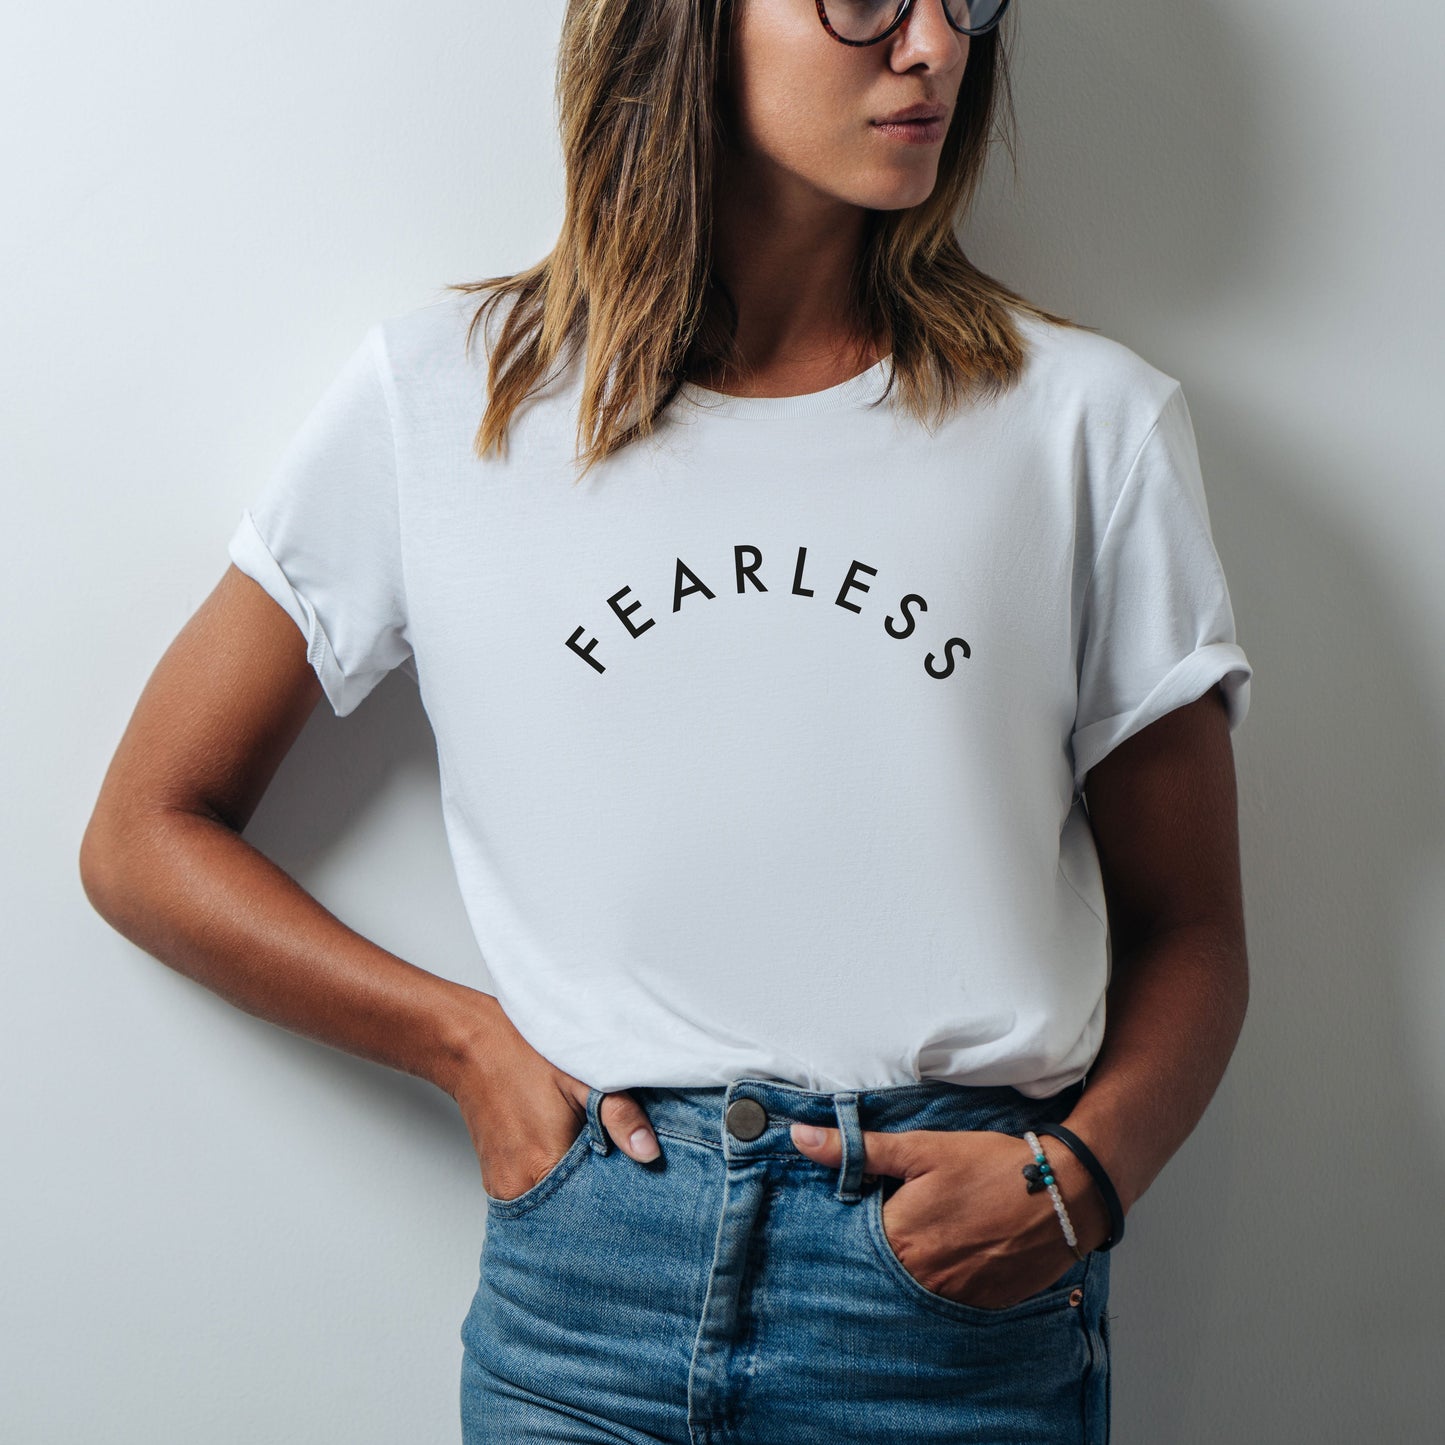 Megan Claire White T-Shirt Fearless